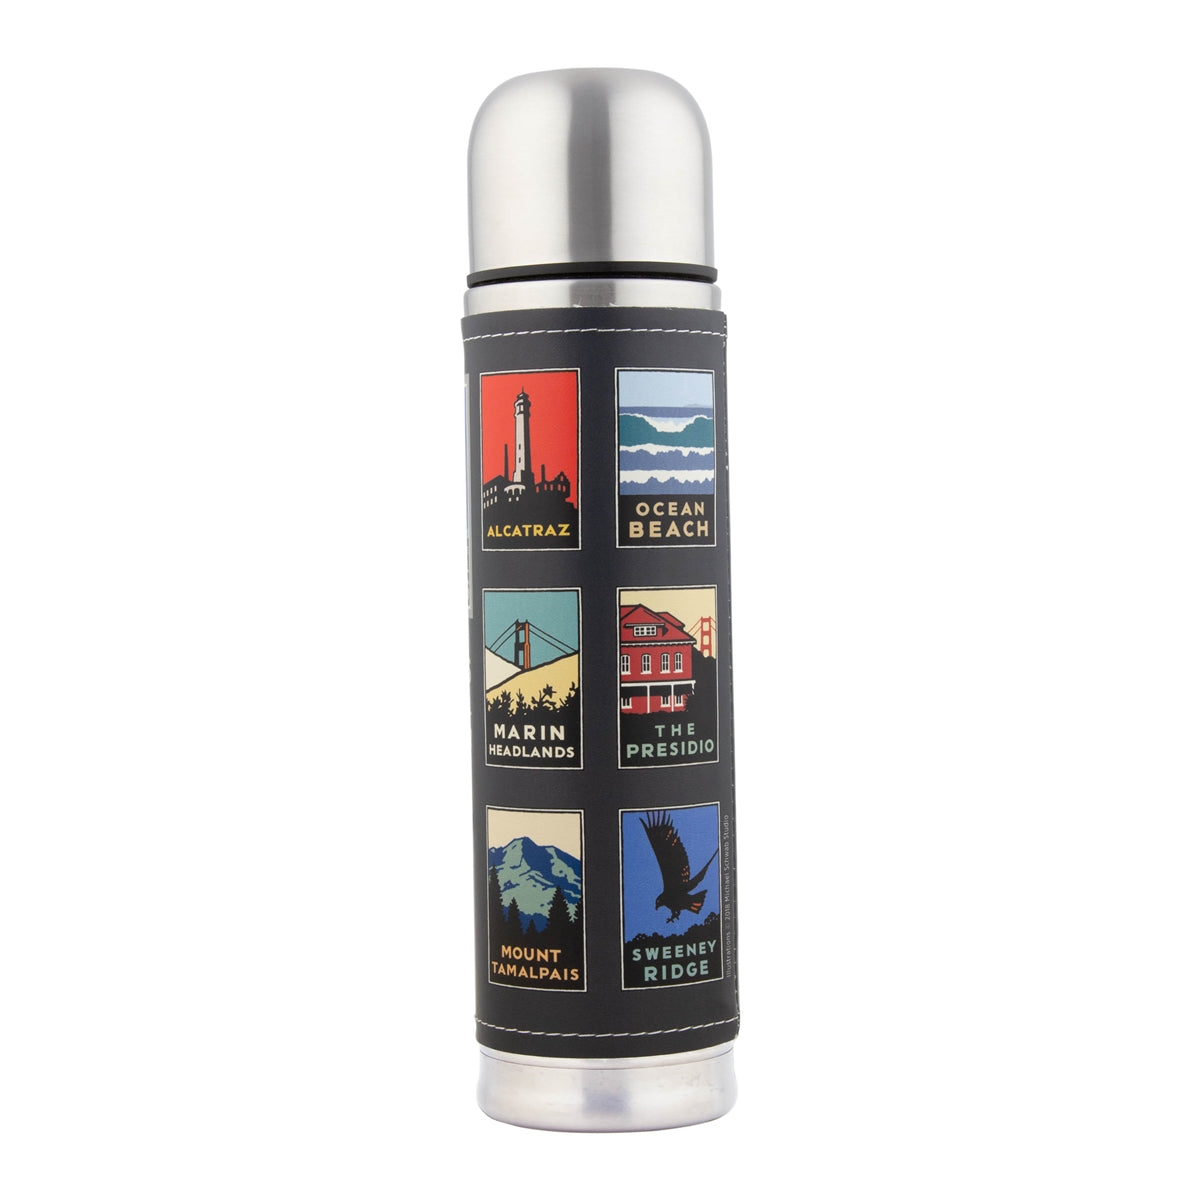 Stainless steel thermos with multicolor printed sleeve, featuring Golden Gate National Parks logos by Michael Schwab.